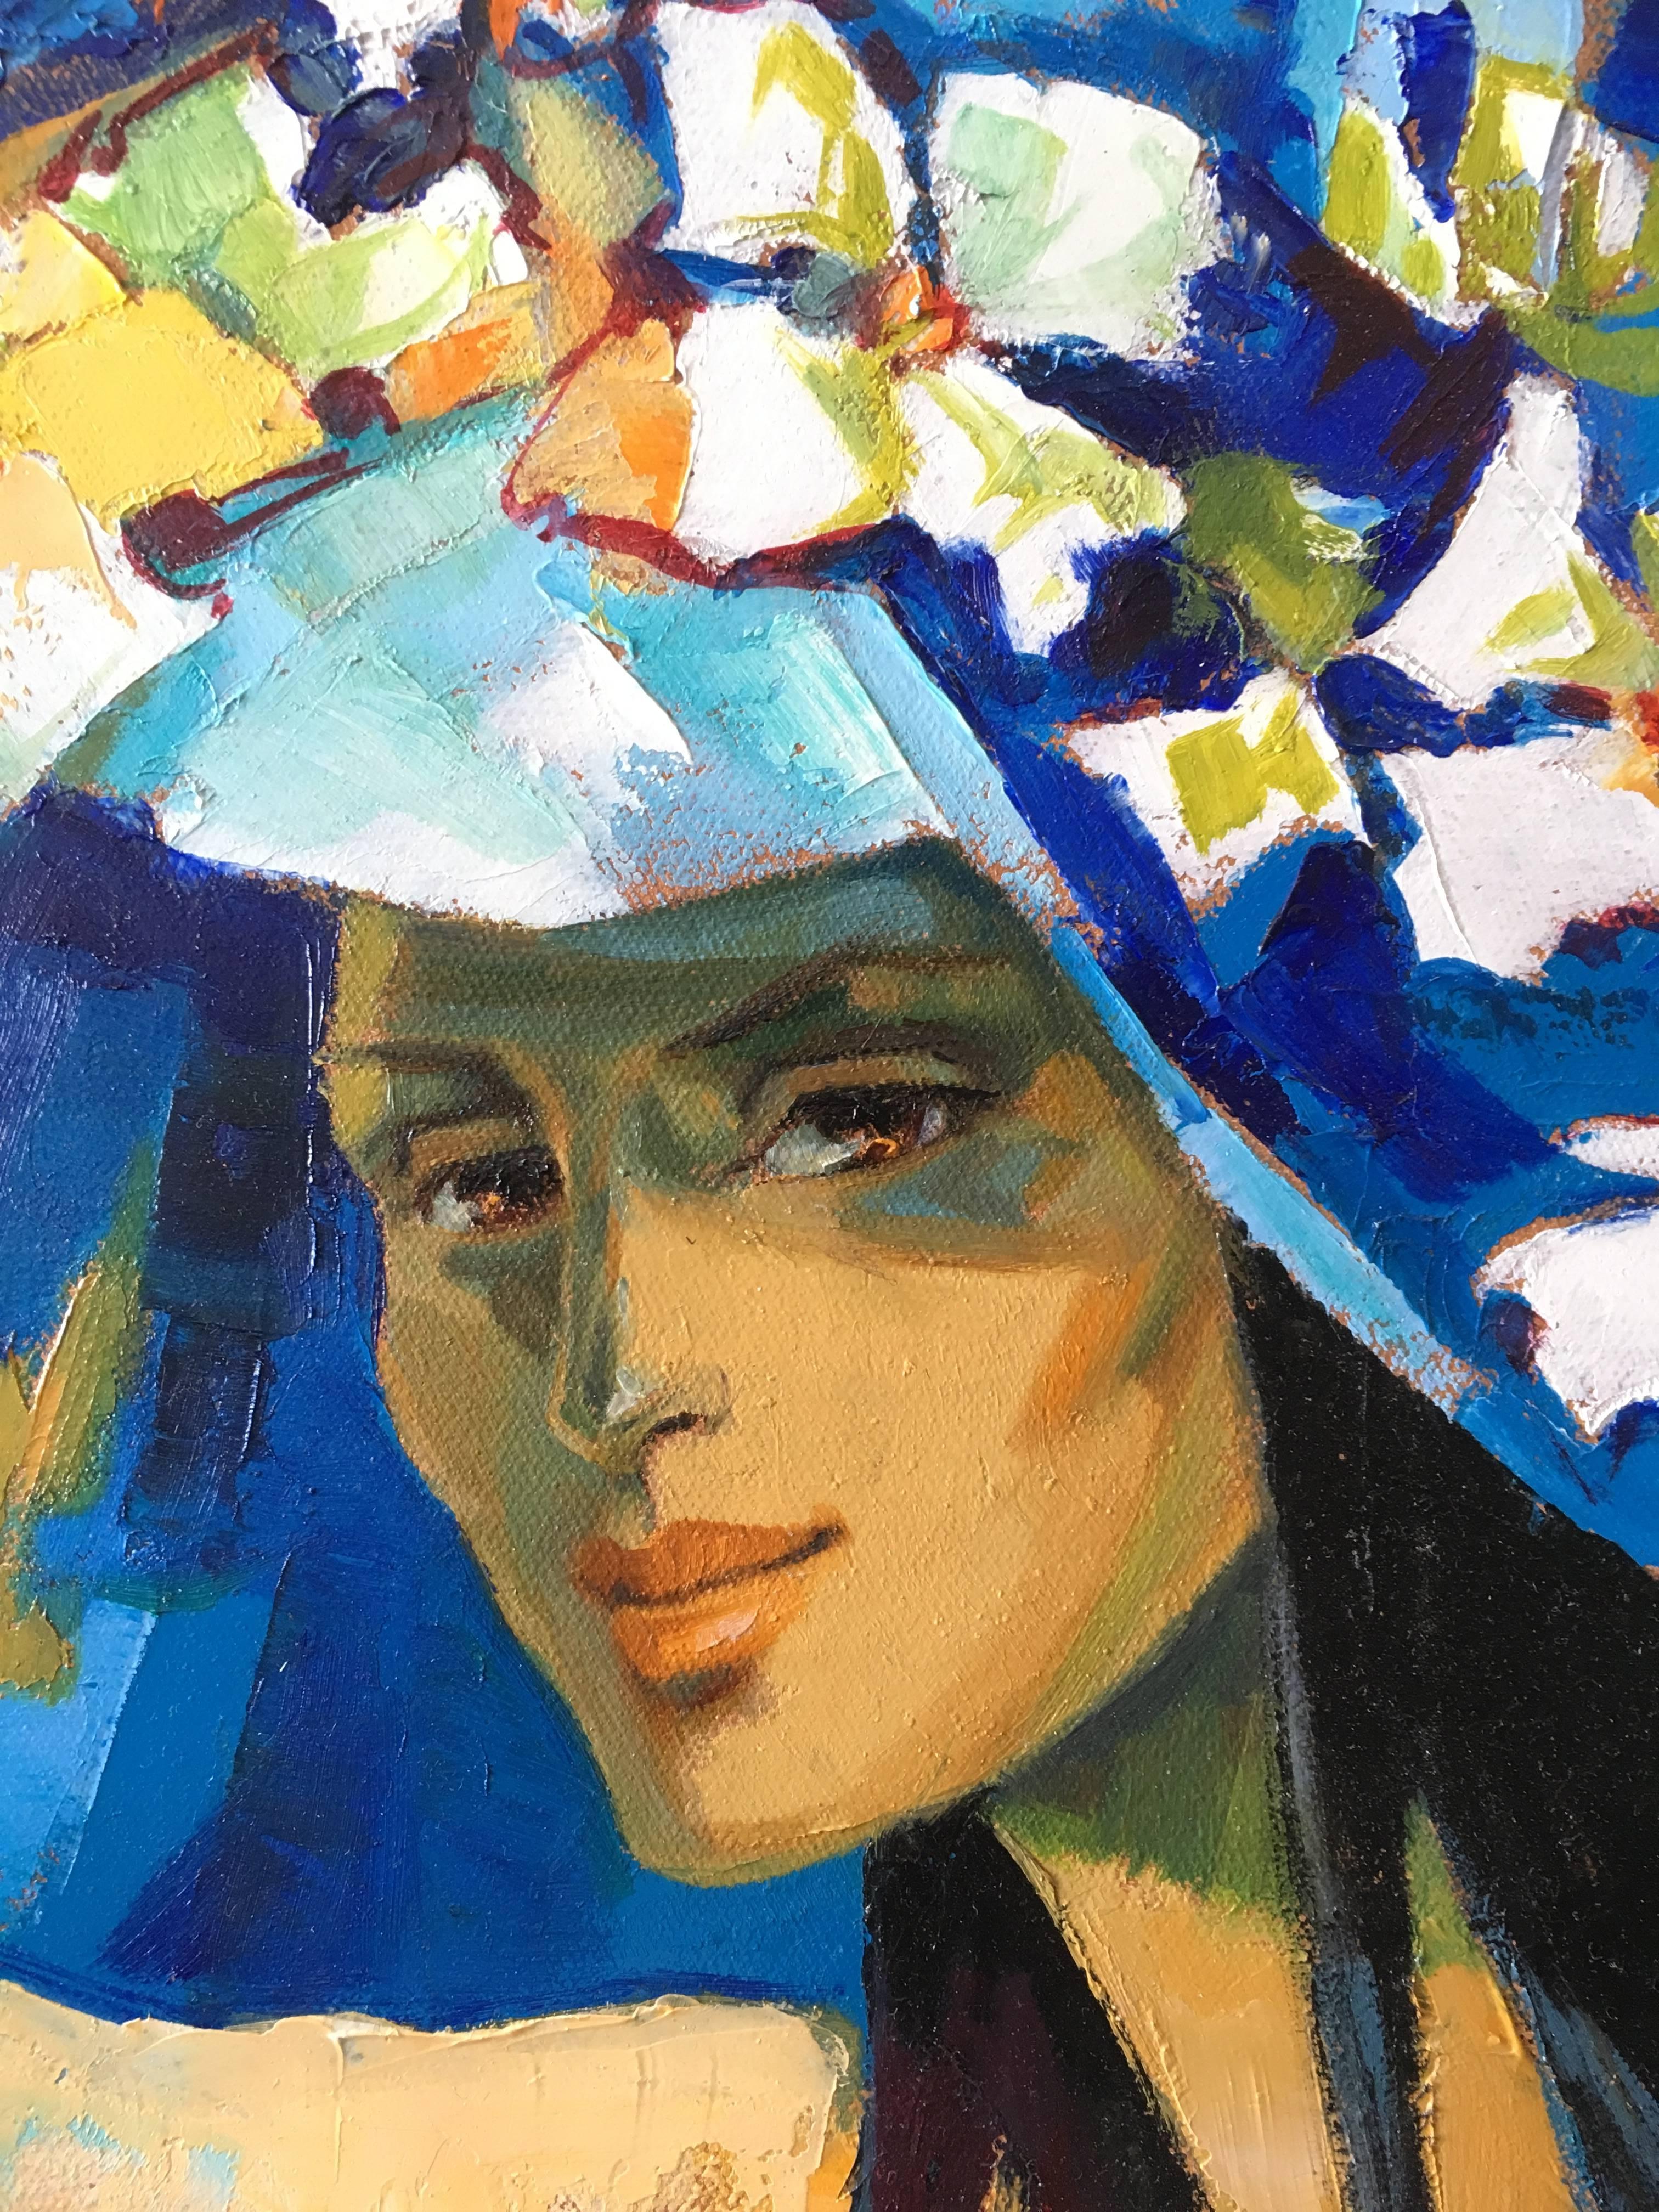 The blue pamela hat, expressionist style  oil painting - Painting by Jori Duran